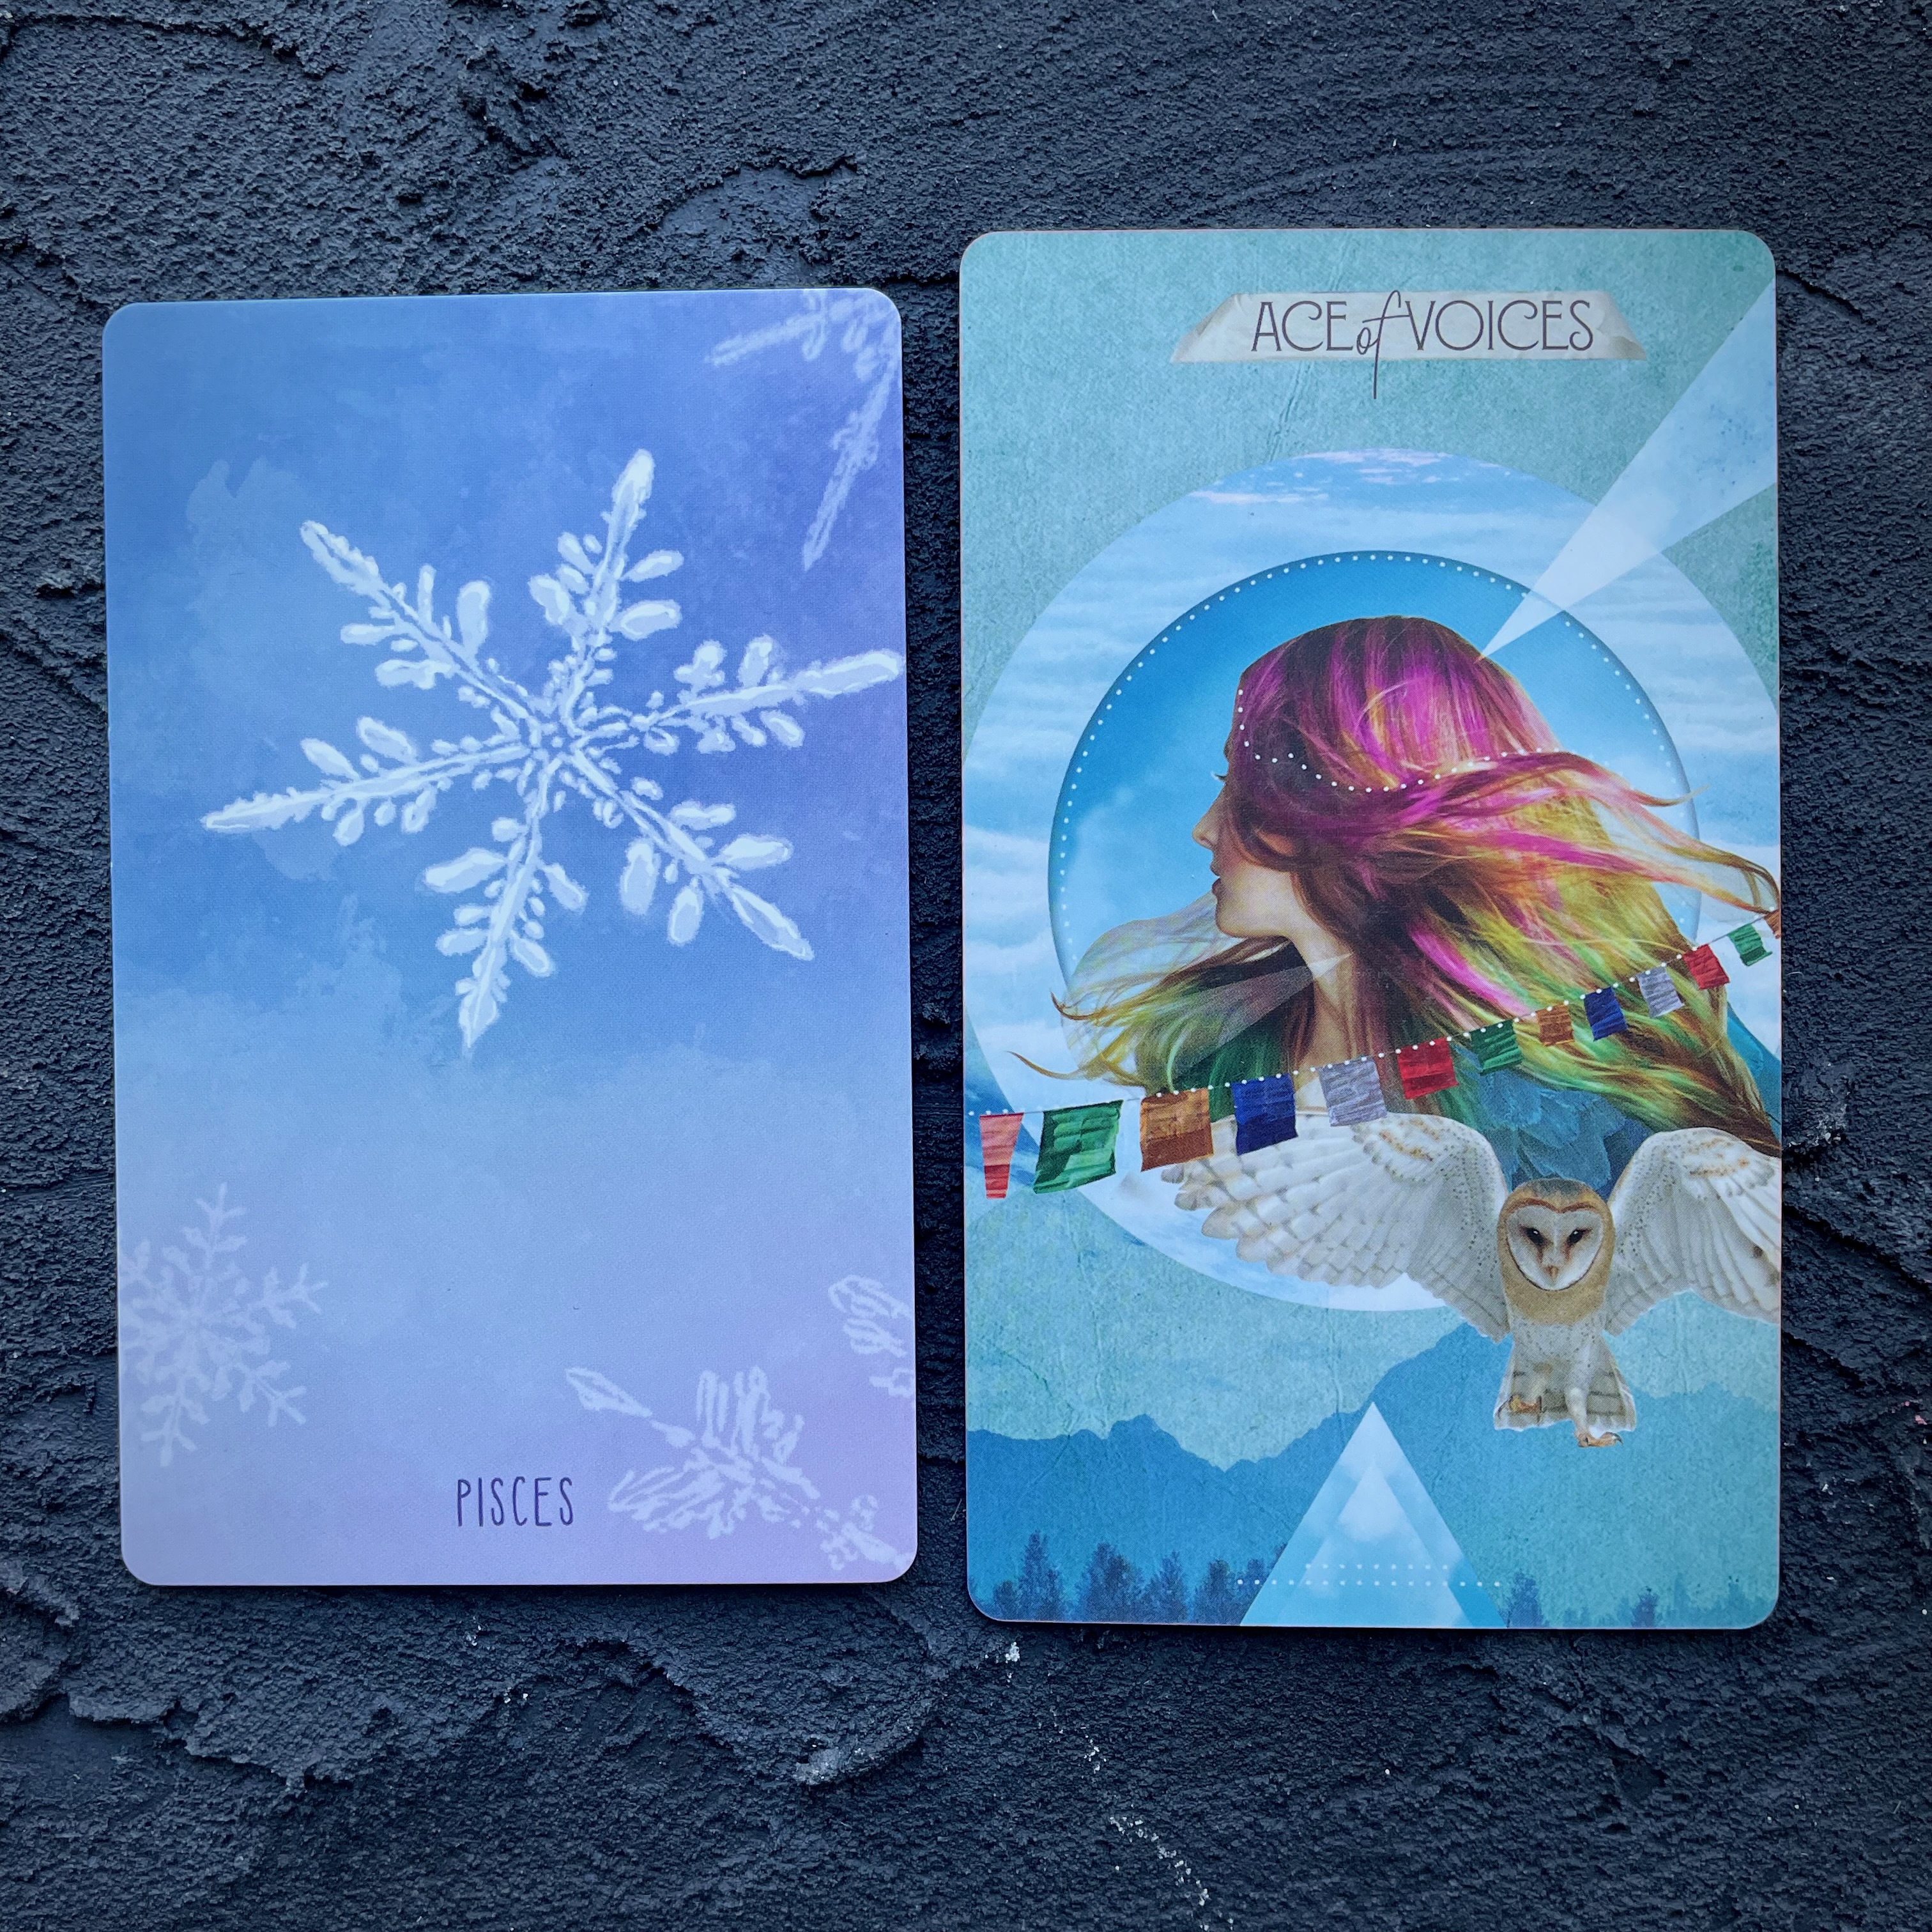 Two cards in front of a navy blue background, right to left: Pisces (a snowflake) and Ace of Voices (a woman with multicolored long hair and an owl)